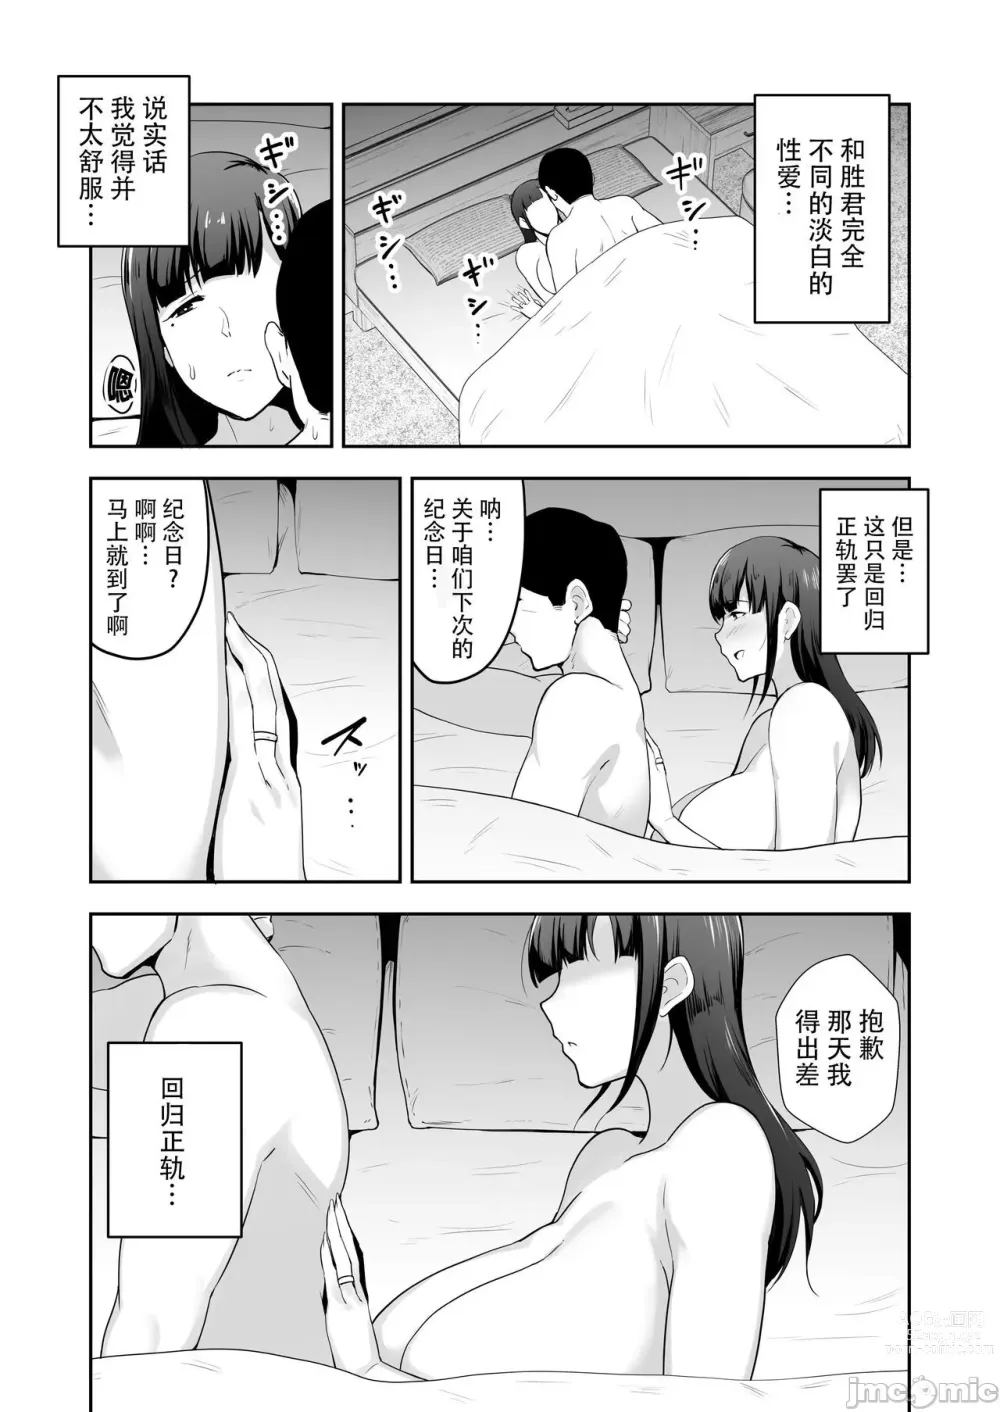 Page 25 of doujinshi uncle wife ntr